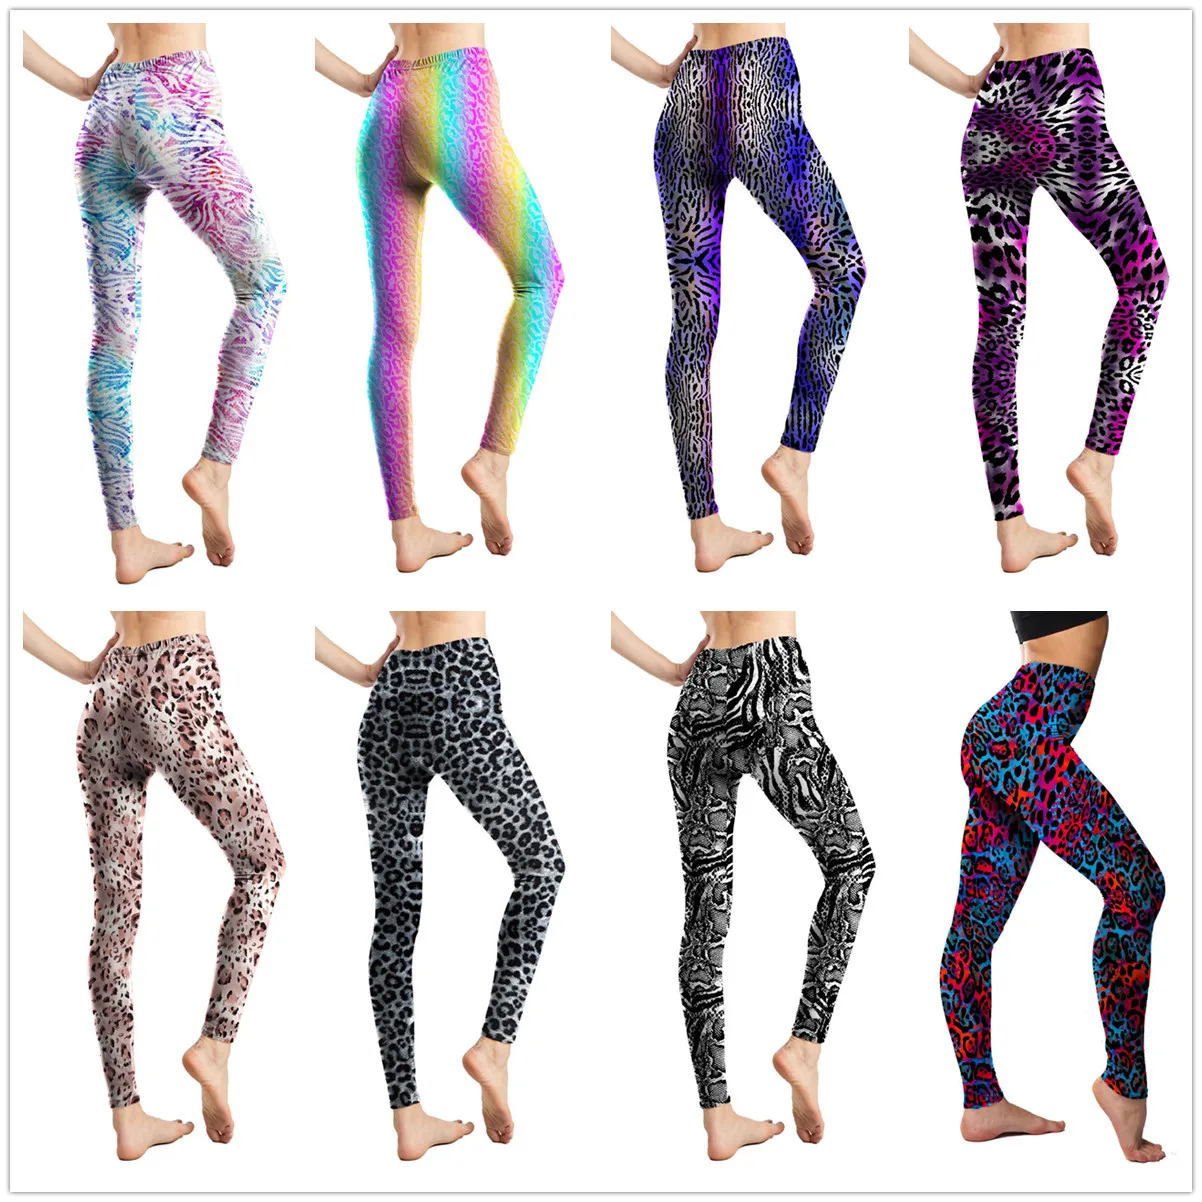 Fashion Leopard Print Leggings Sexy Casual Highly Elastic Leggings Thin Female Pants Women Fitness Tights Drop Shipping